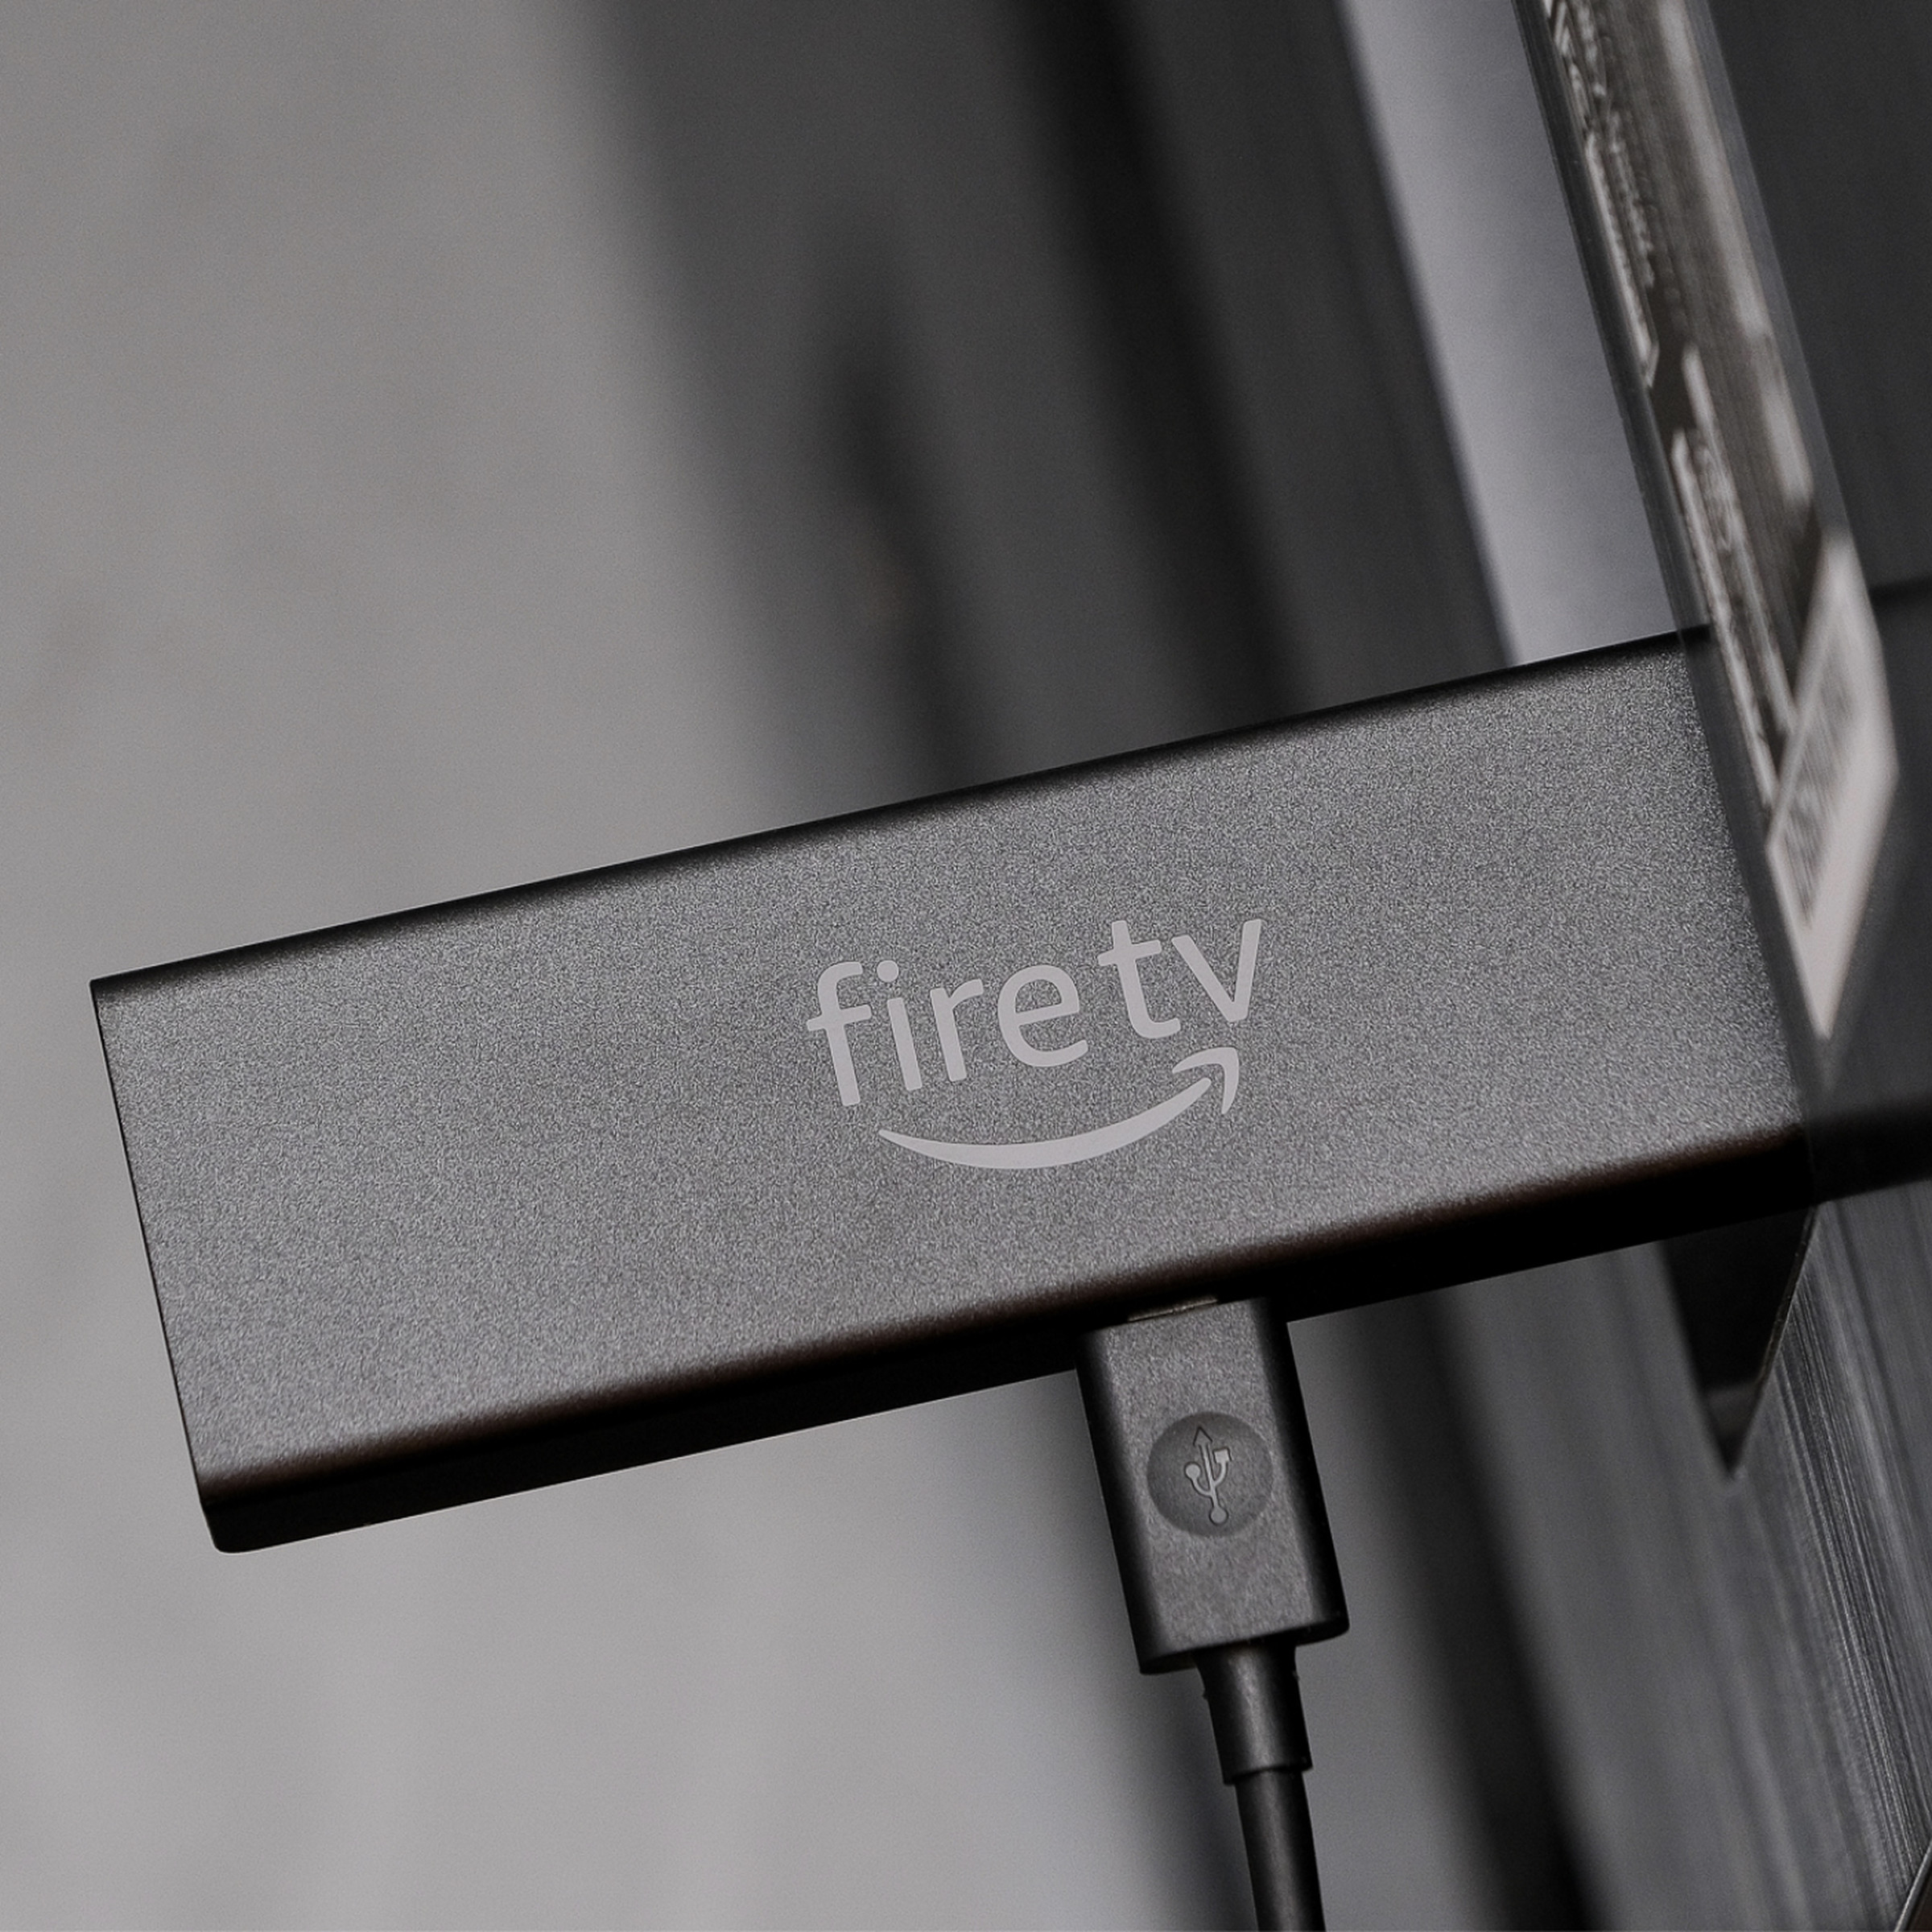 Amazon's Hearth TV Stick 4K Max is on sale for its lowest worth but